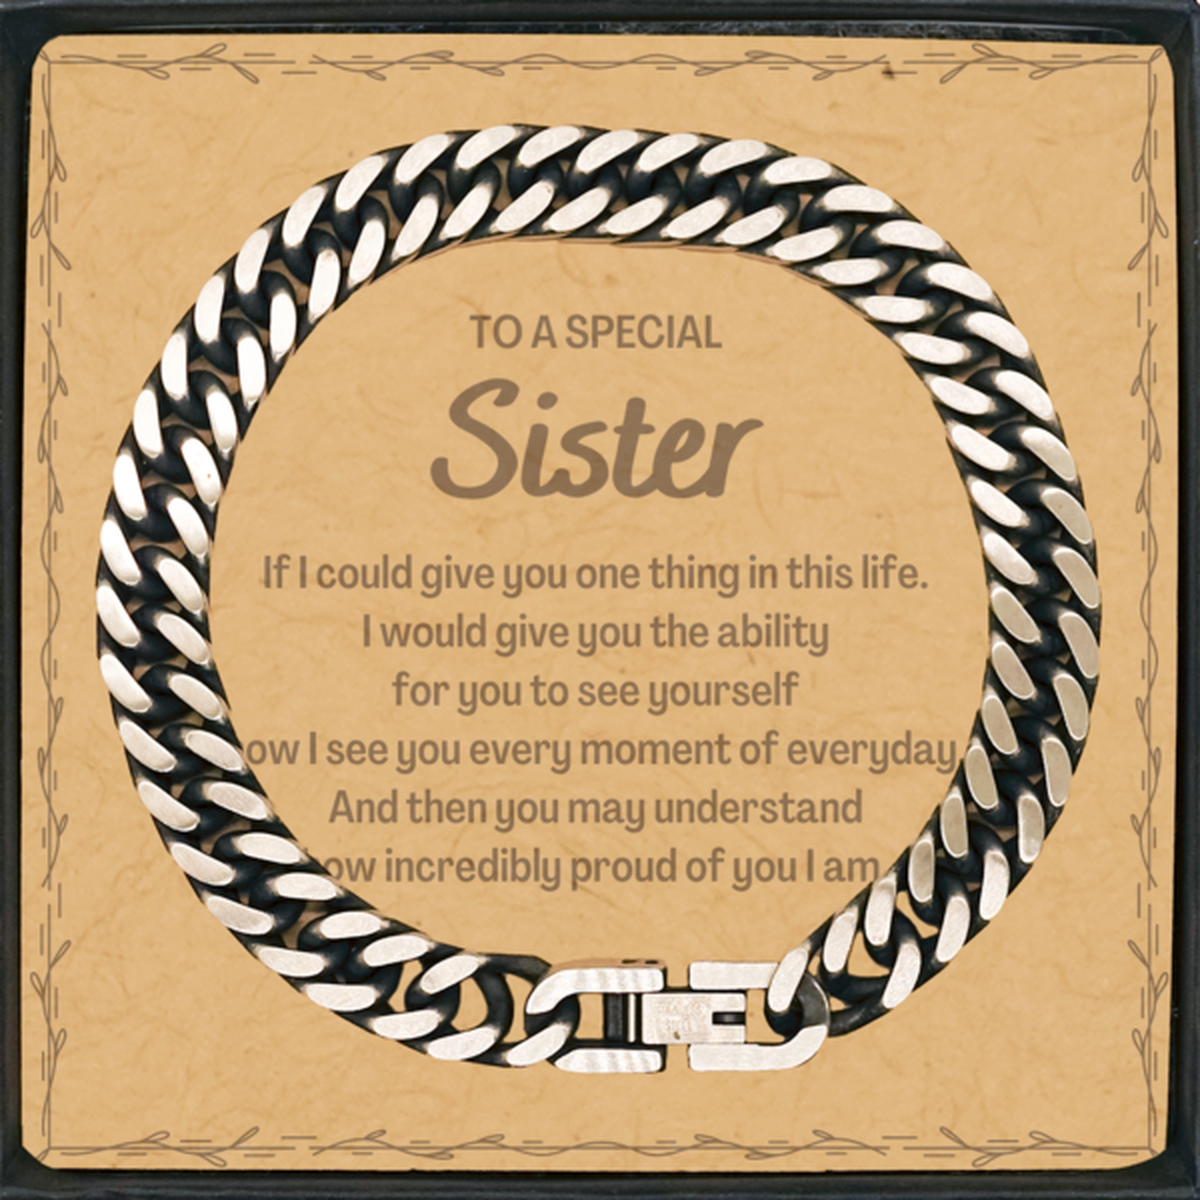 To My Sister Cuban Link Chain Bracelet, Gifts For Sister Message Card, Inspirational Gifts for Christmas Birthday, Epic Gifts for Sister To A Special Sister how incredibly proud of you I am